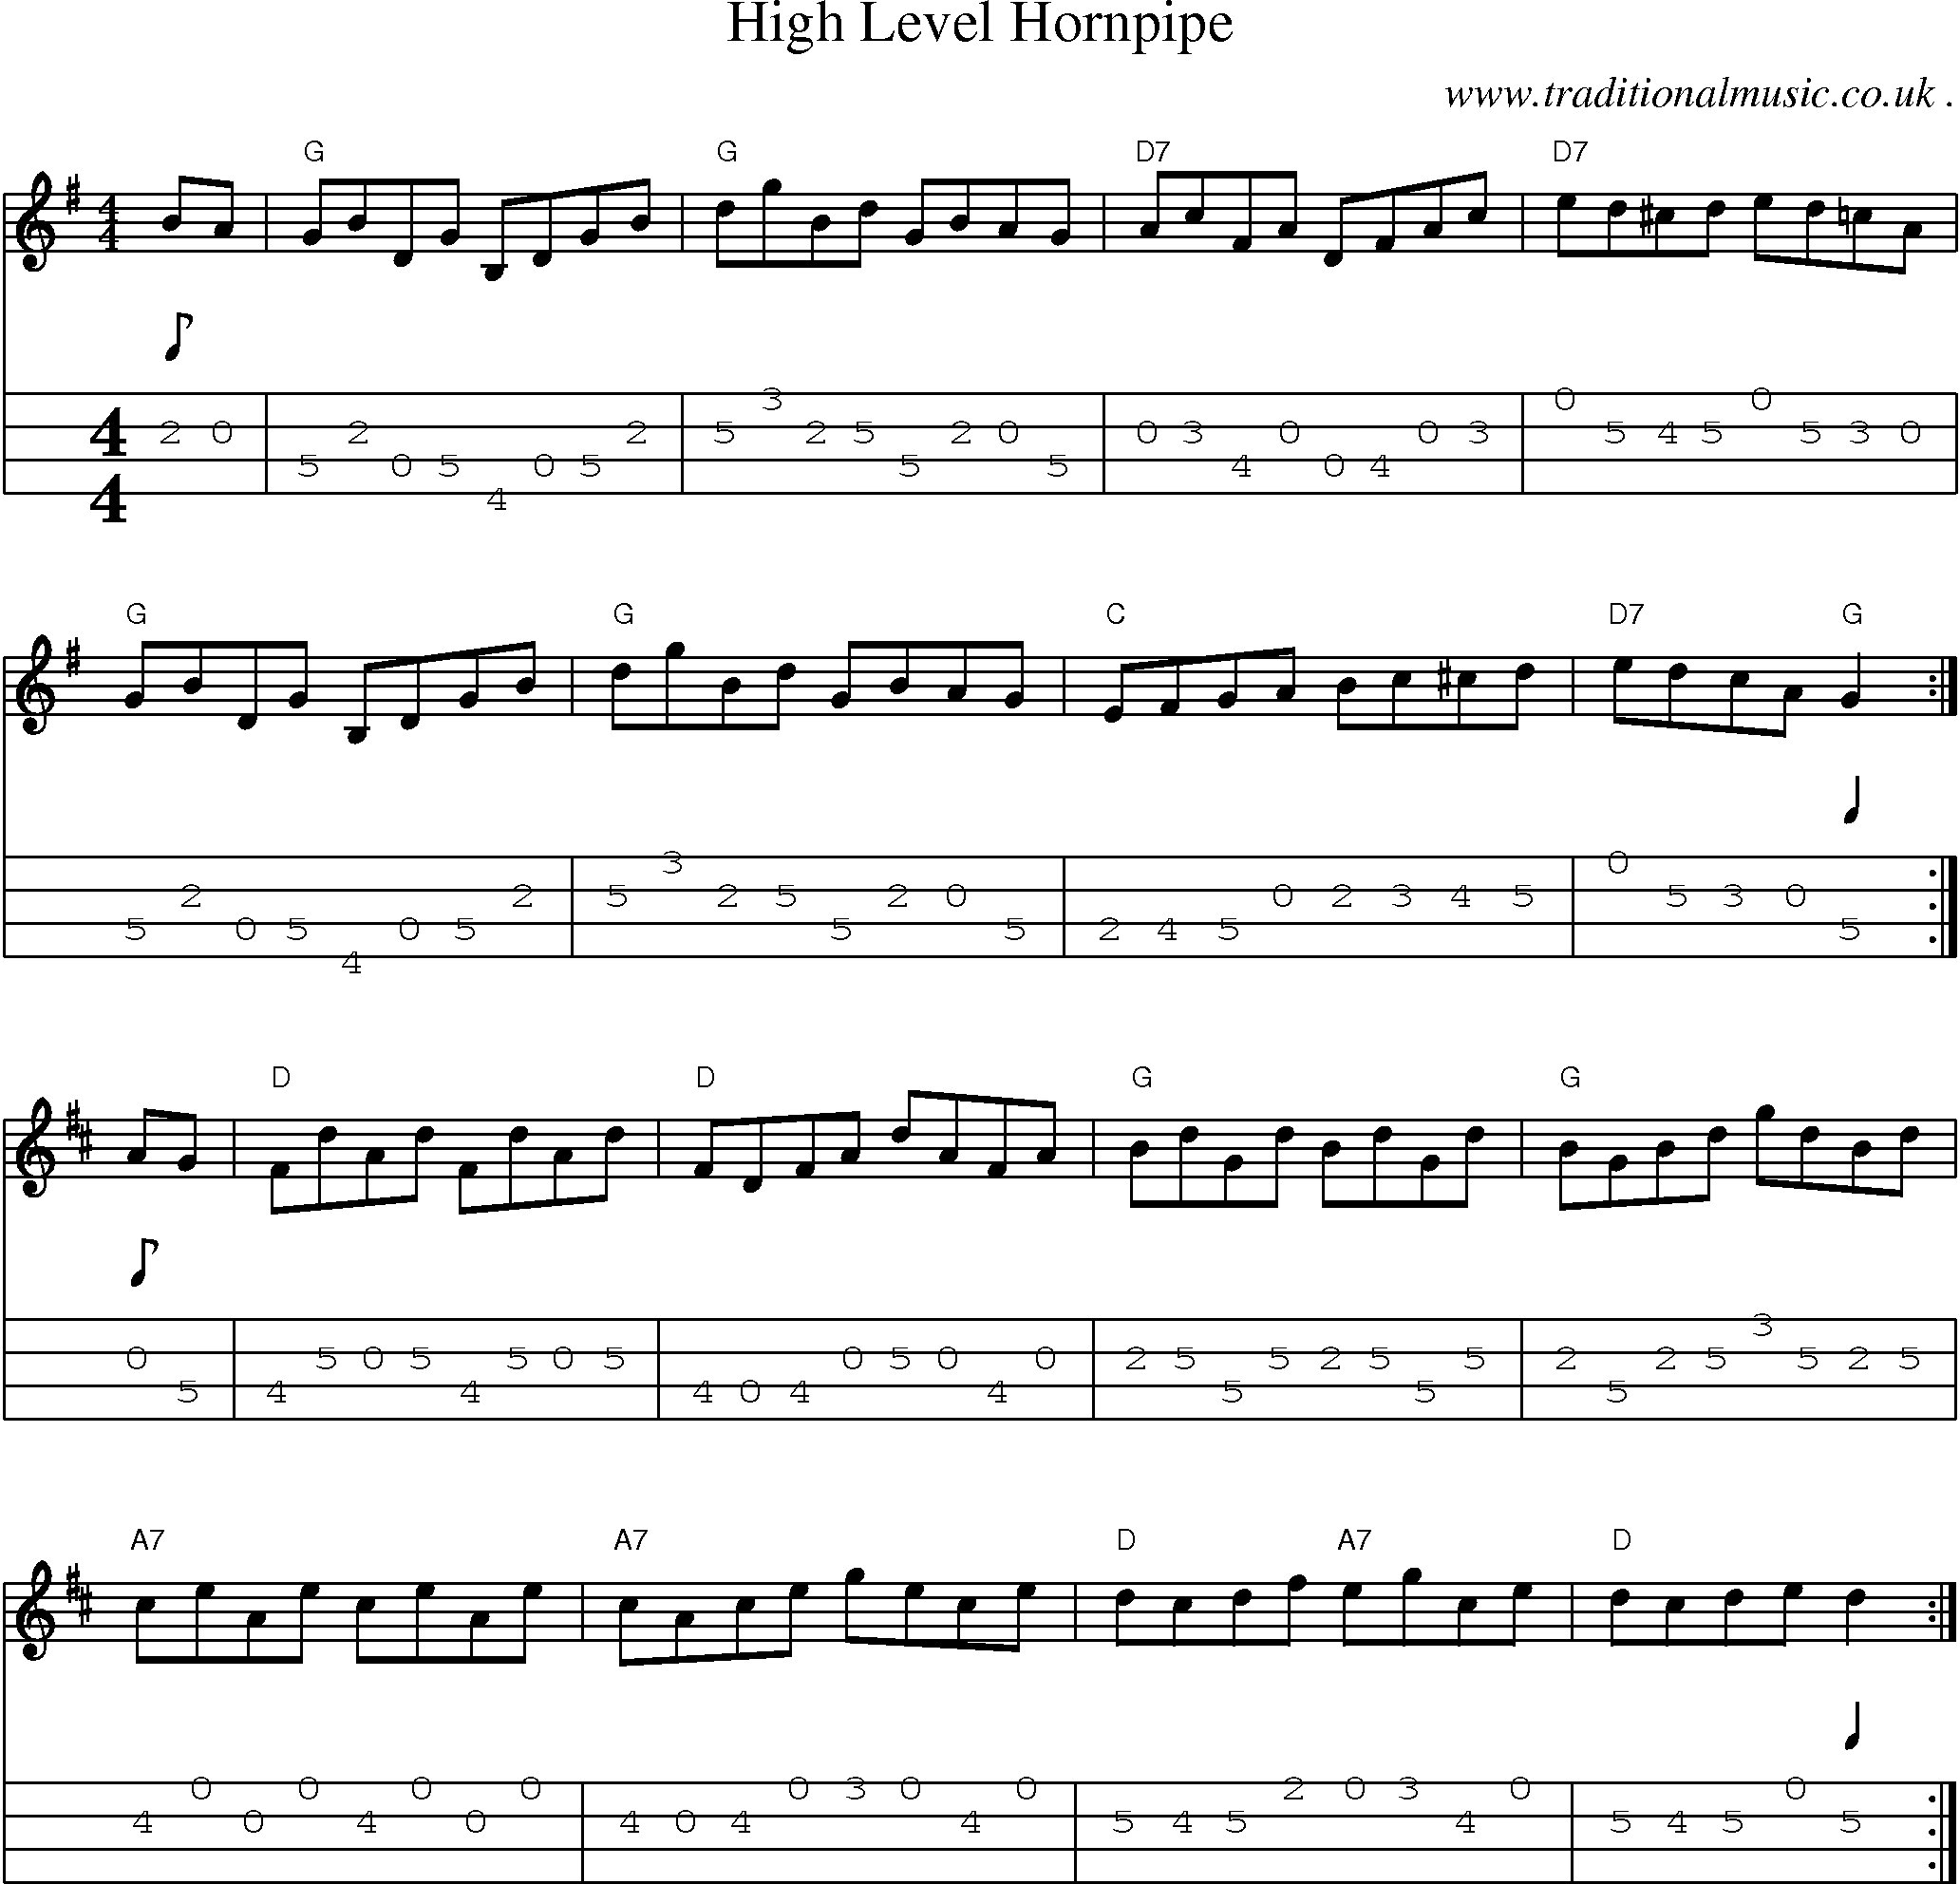 Music Score and Guitar Tabs for High Level Hornpipe